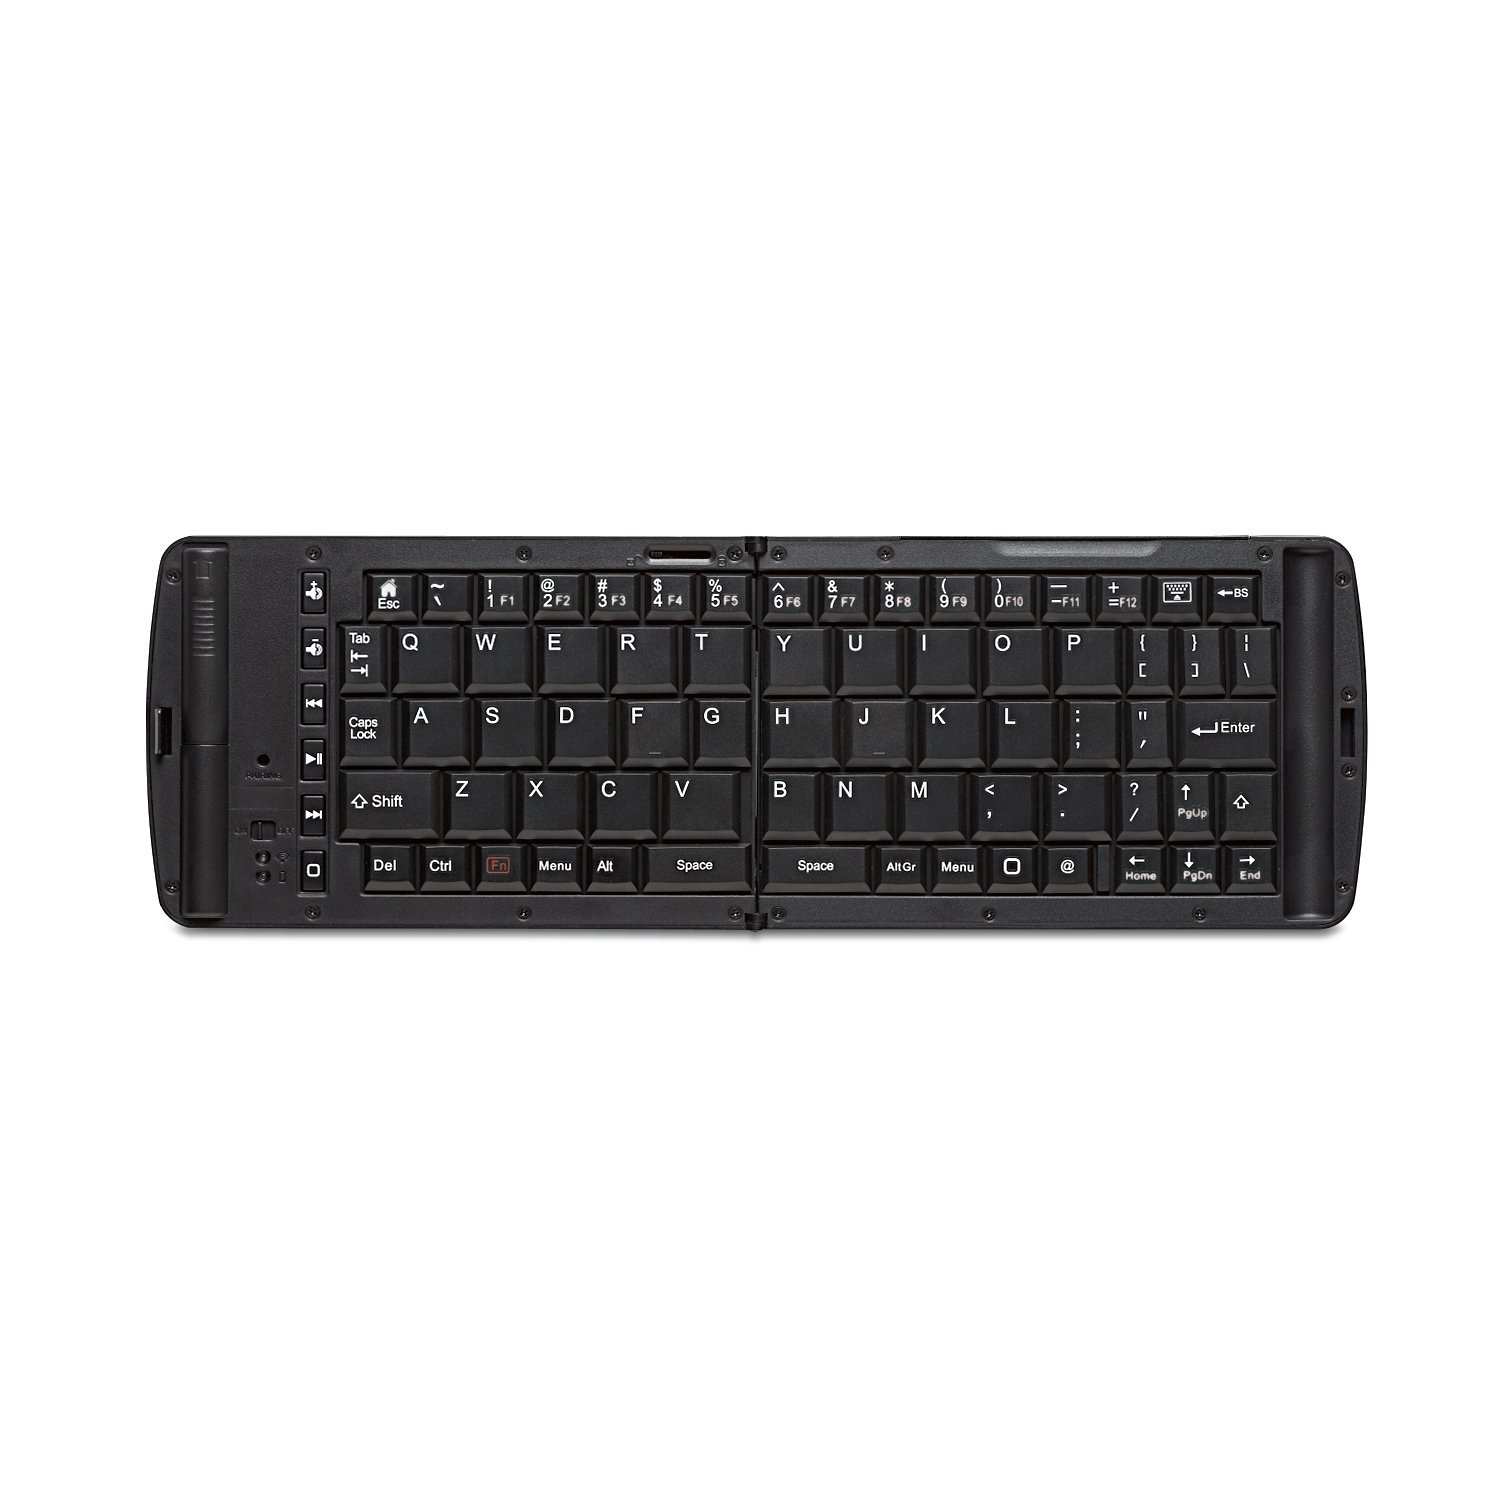 http://thetechjournal.com/wp-content/uploads/images/1110/1319474214-verbatim-97537-wireless-bluetooth-mobile-keyboard-for-all-ios-devices-and-other-tablets-1.jpg